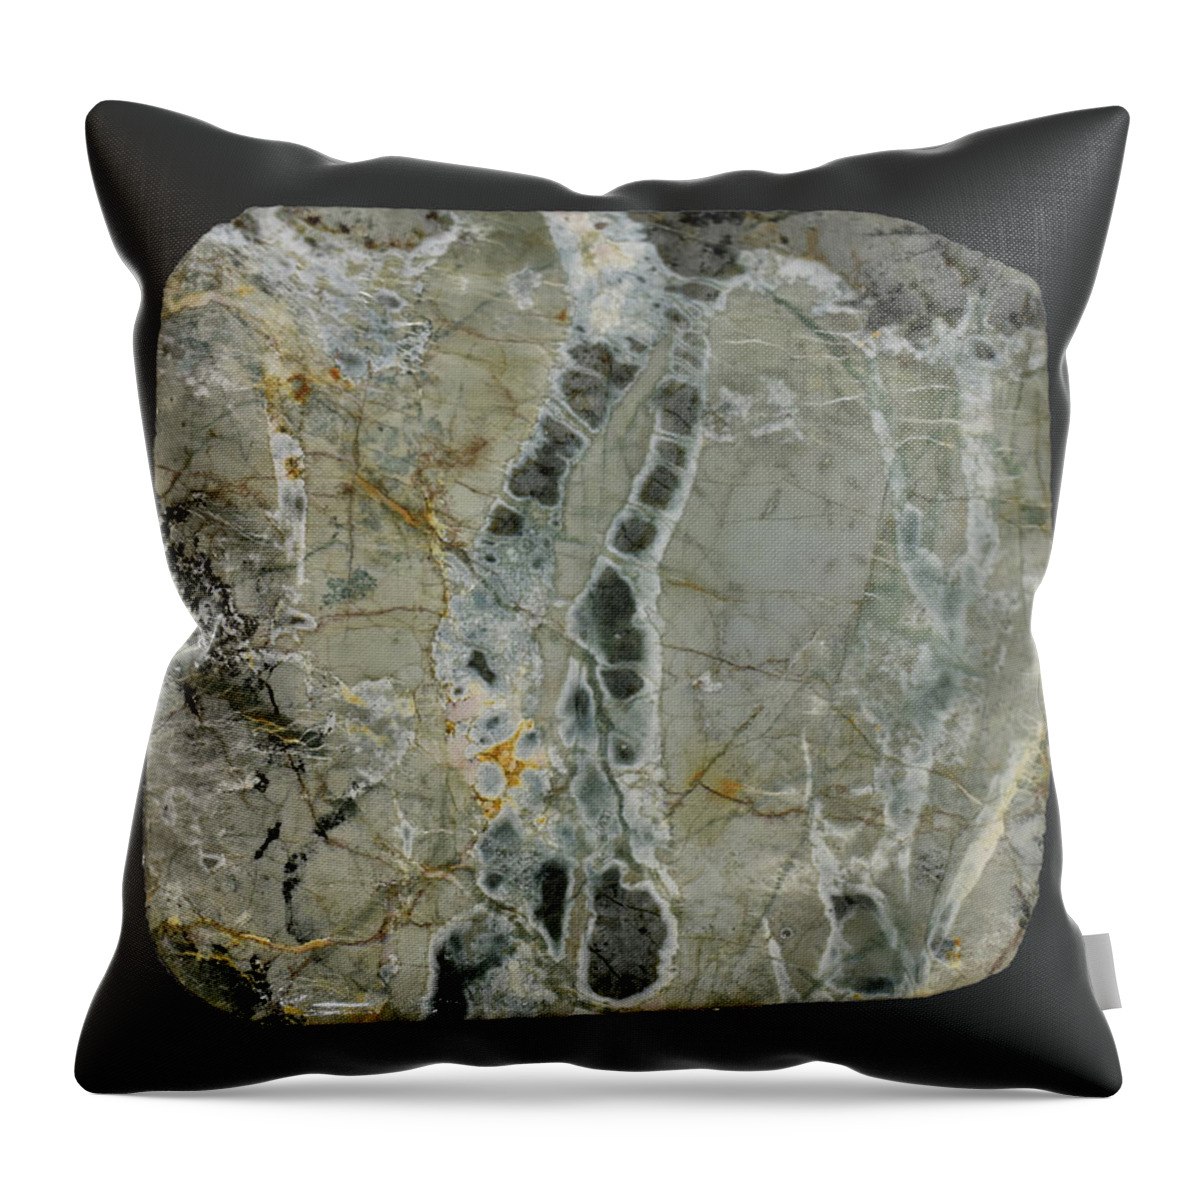 Art In A Rock Throw Pillow featuring the photograph Mr1034 by Art in a Rock